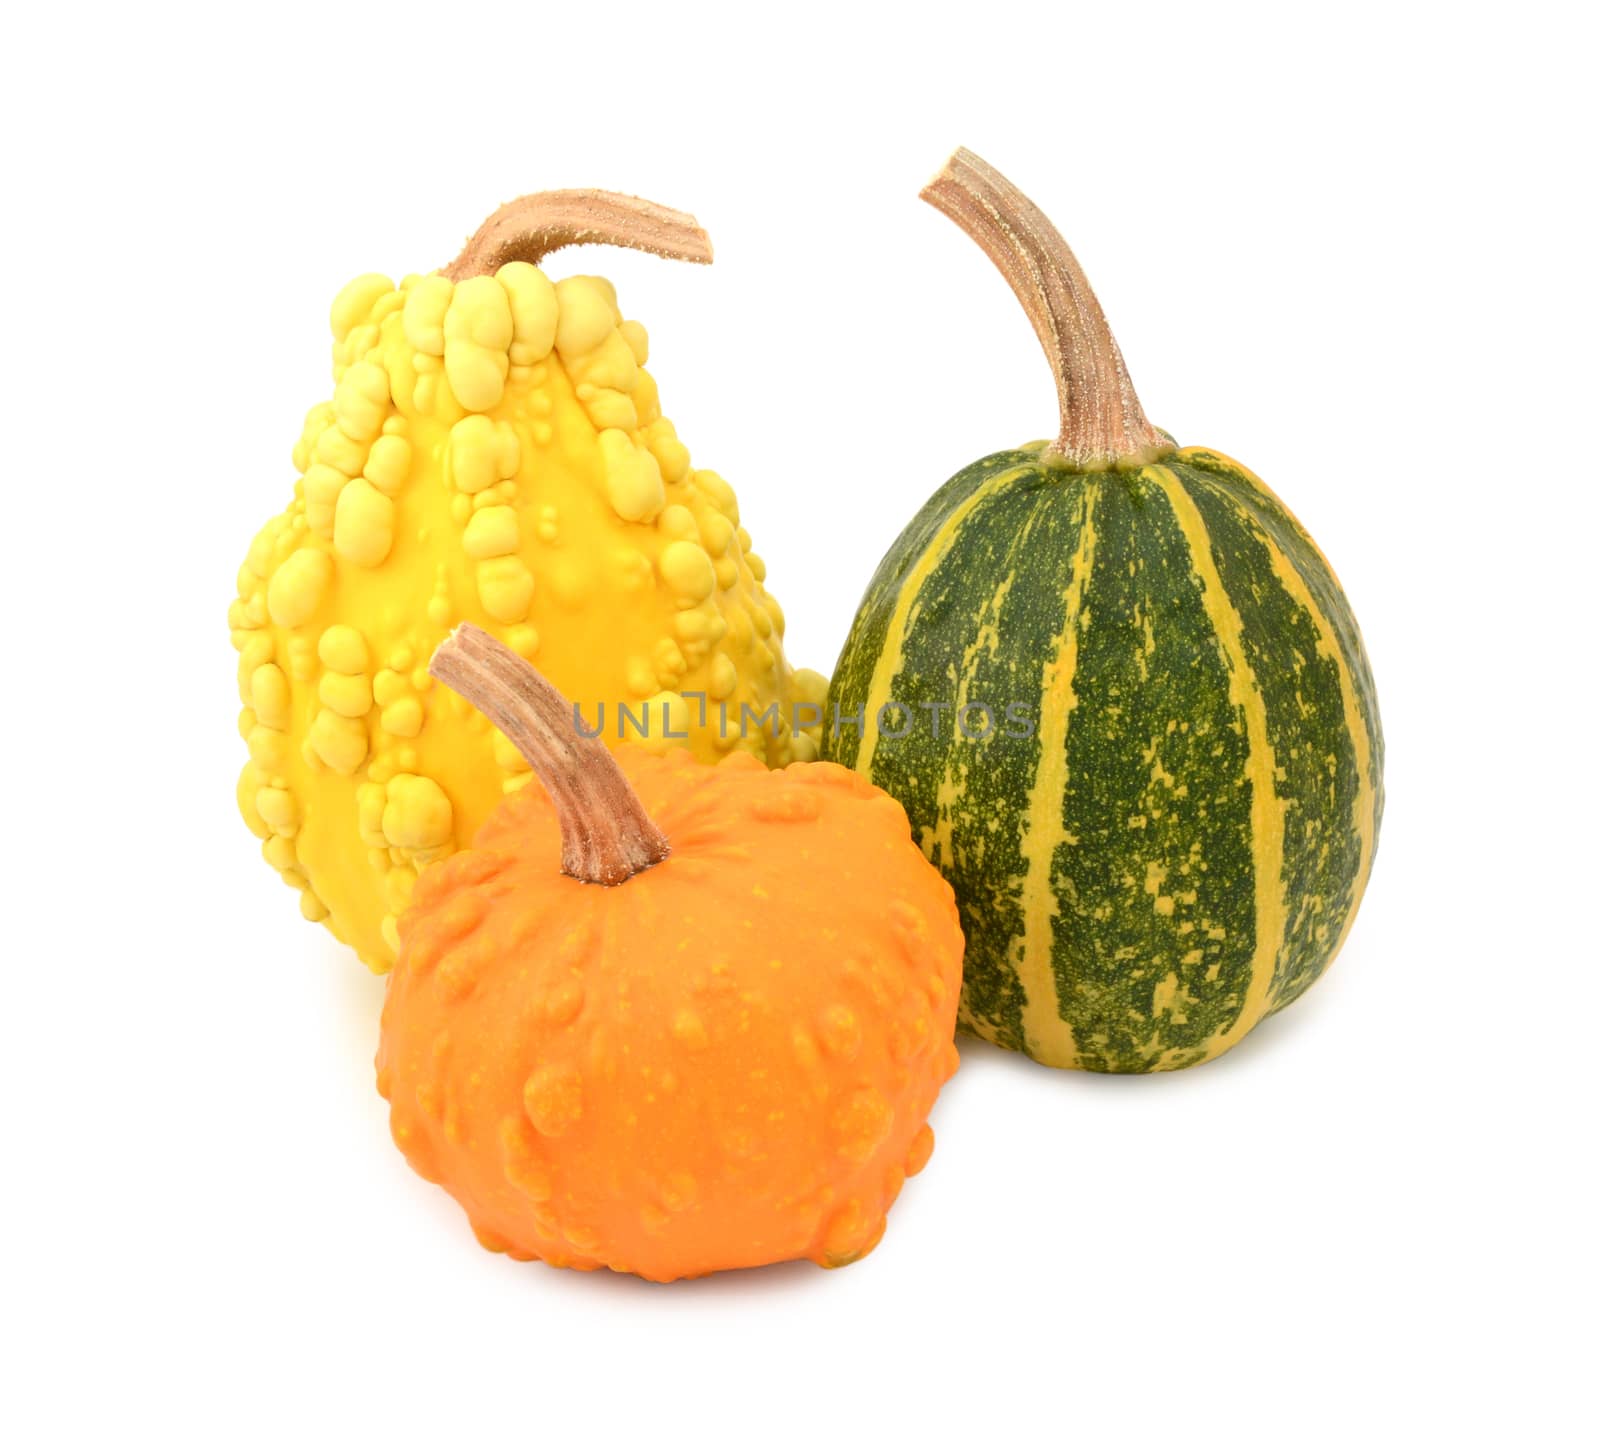 Three yellow, orange and striped green ornamental gourds for autumn decoration, on a white background